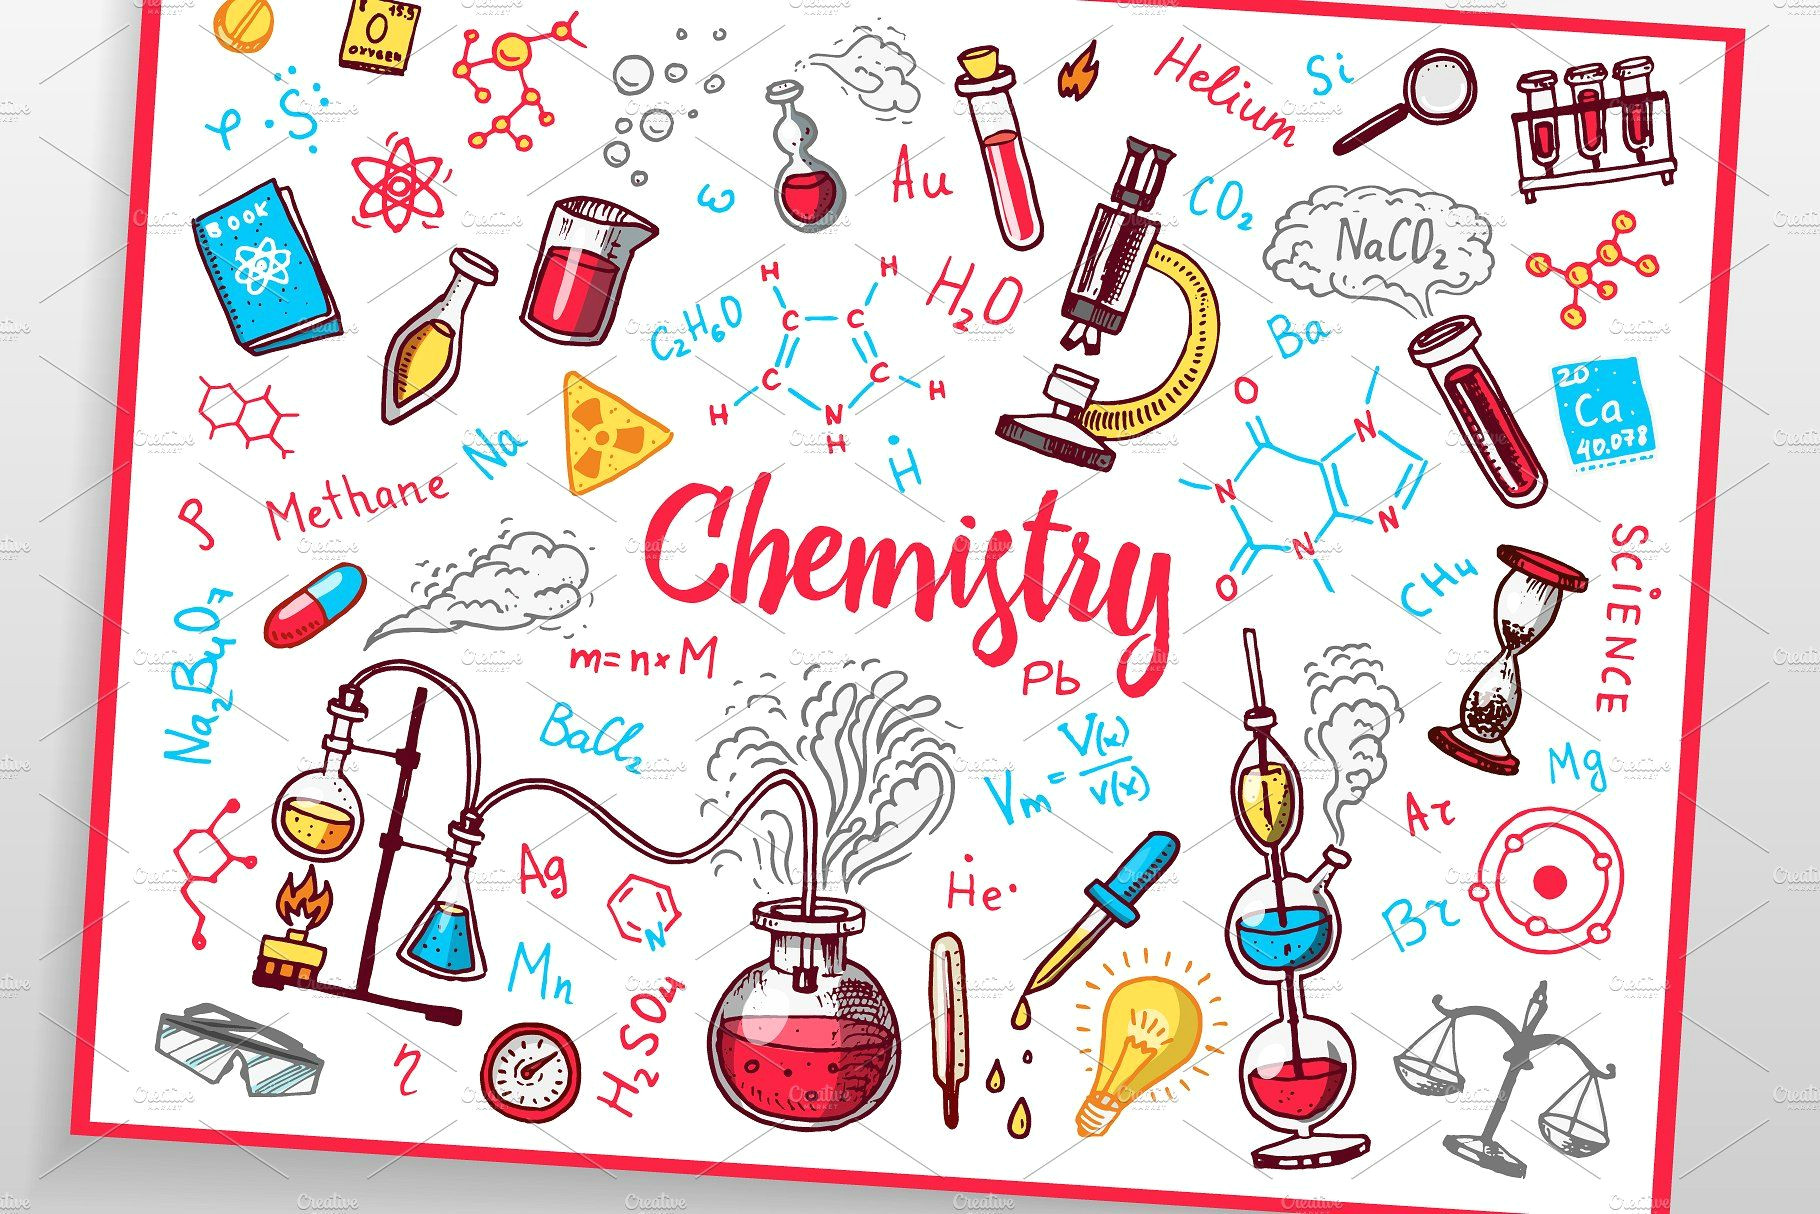 Easy Science Drawings Chemistry Icons Doodle Set by Artbalitskiy On